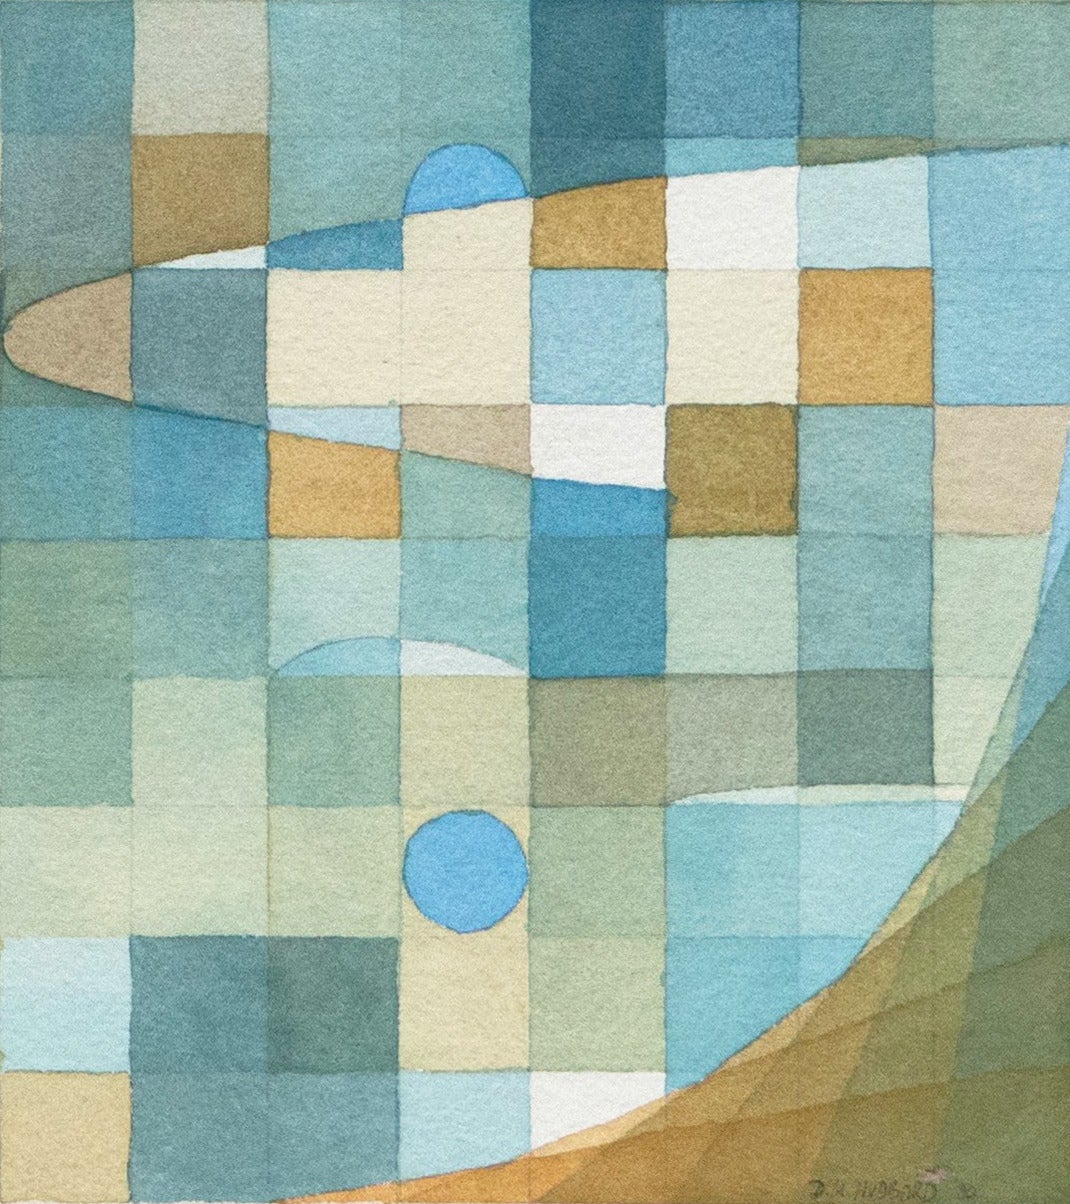 A substantial abstract watercolor comprising harmonious geometric forms arranged on a grid of blue, green, ivory and buff mosaic-like rectangles. Signed lower right 